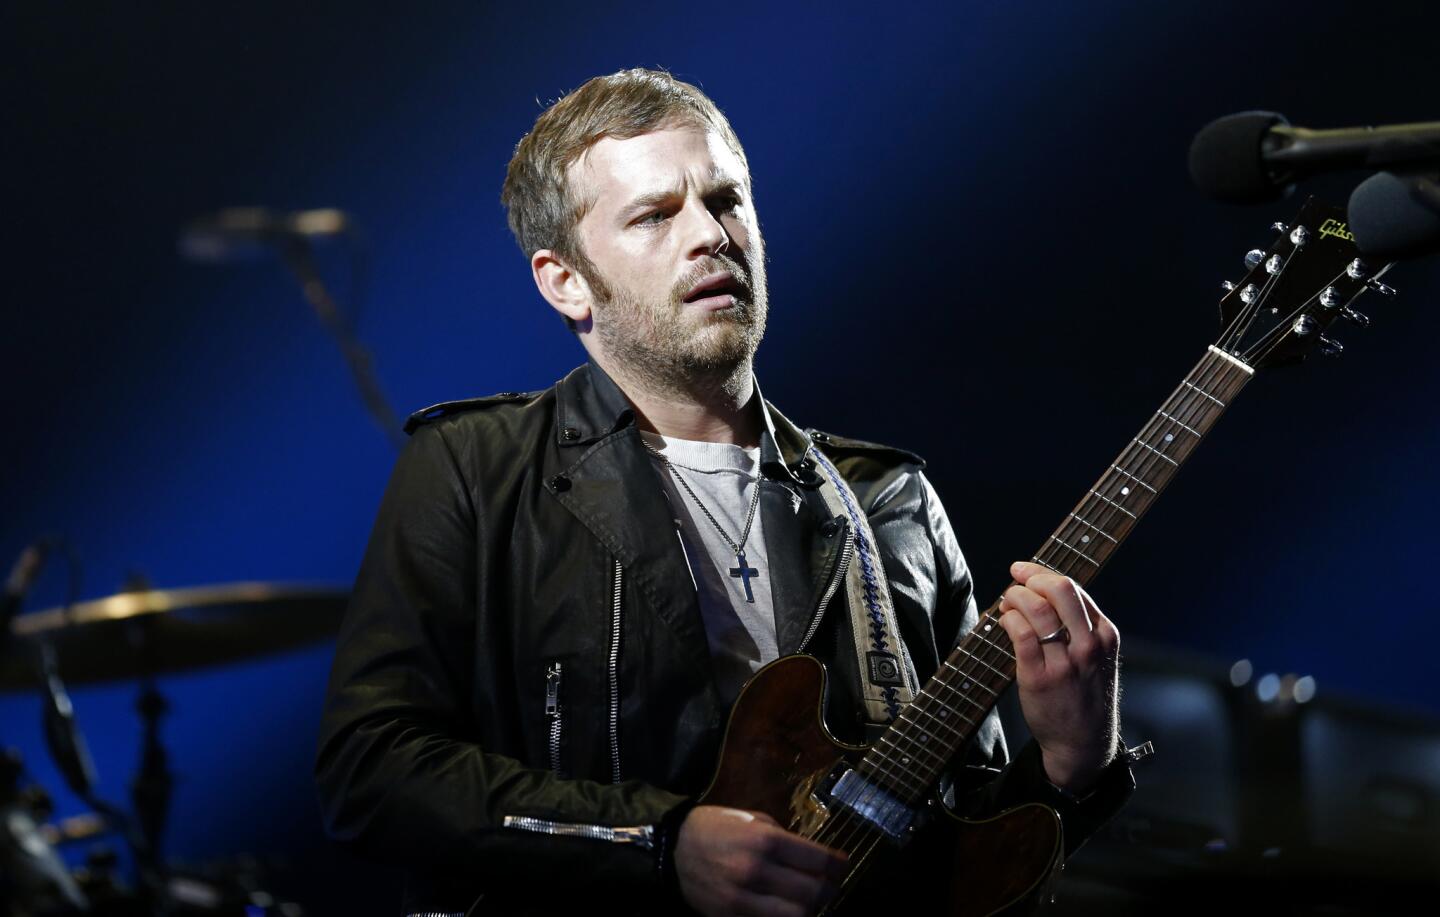 Kings of Leon used the festival circuit as a springboard over the last decade to becoming an arena rock band, and they headlined Lollapalooza in 2009.